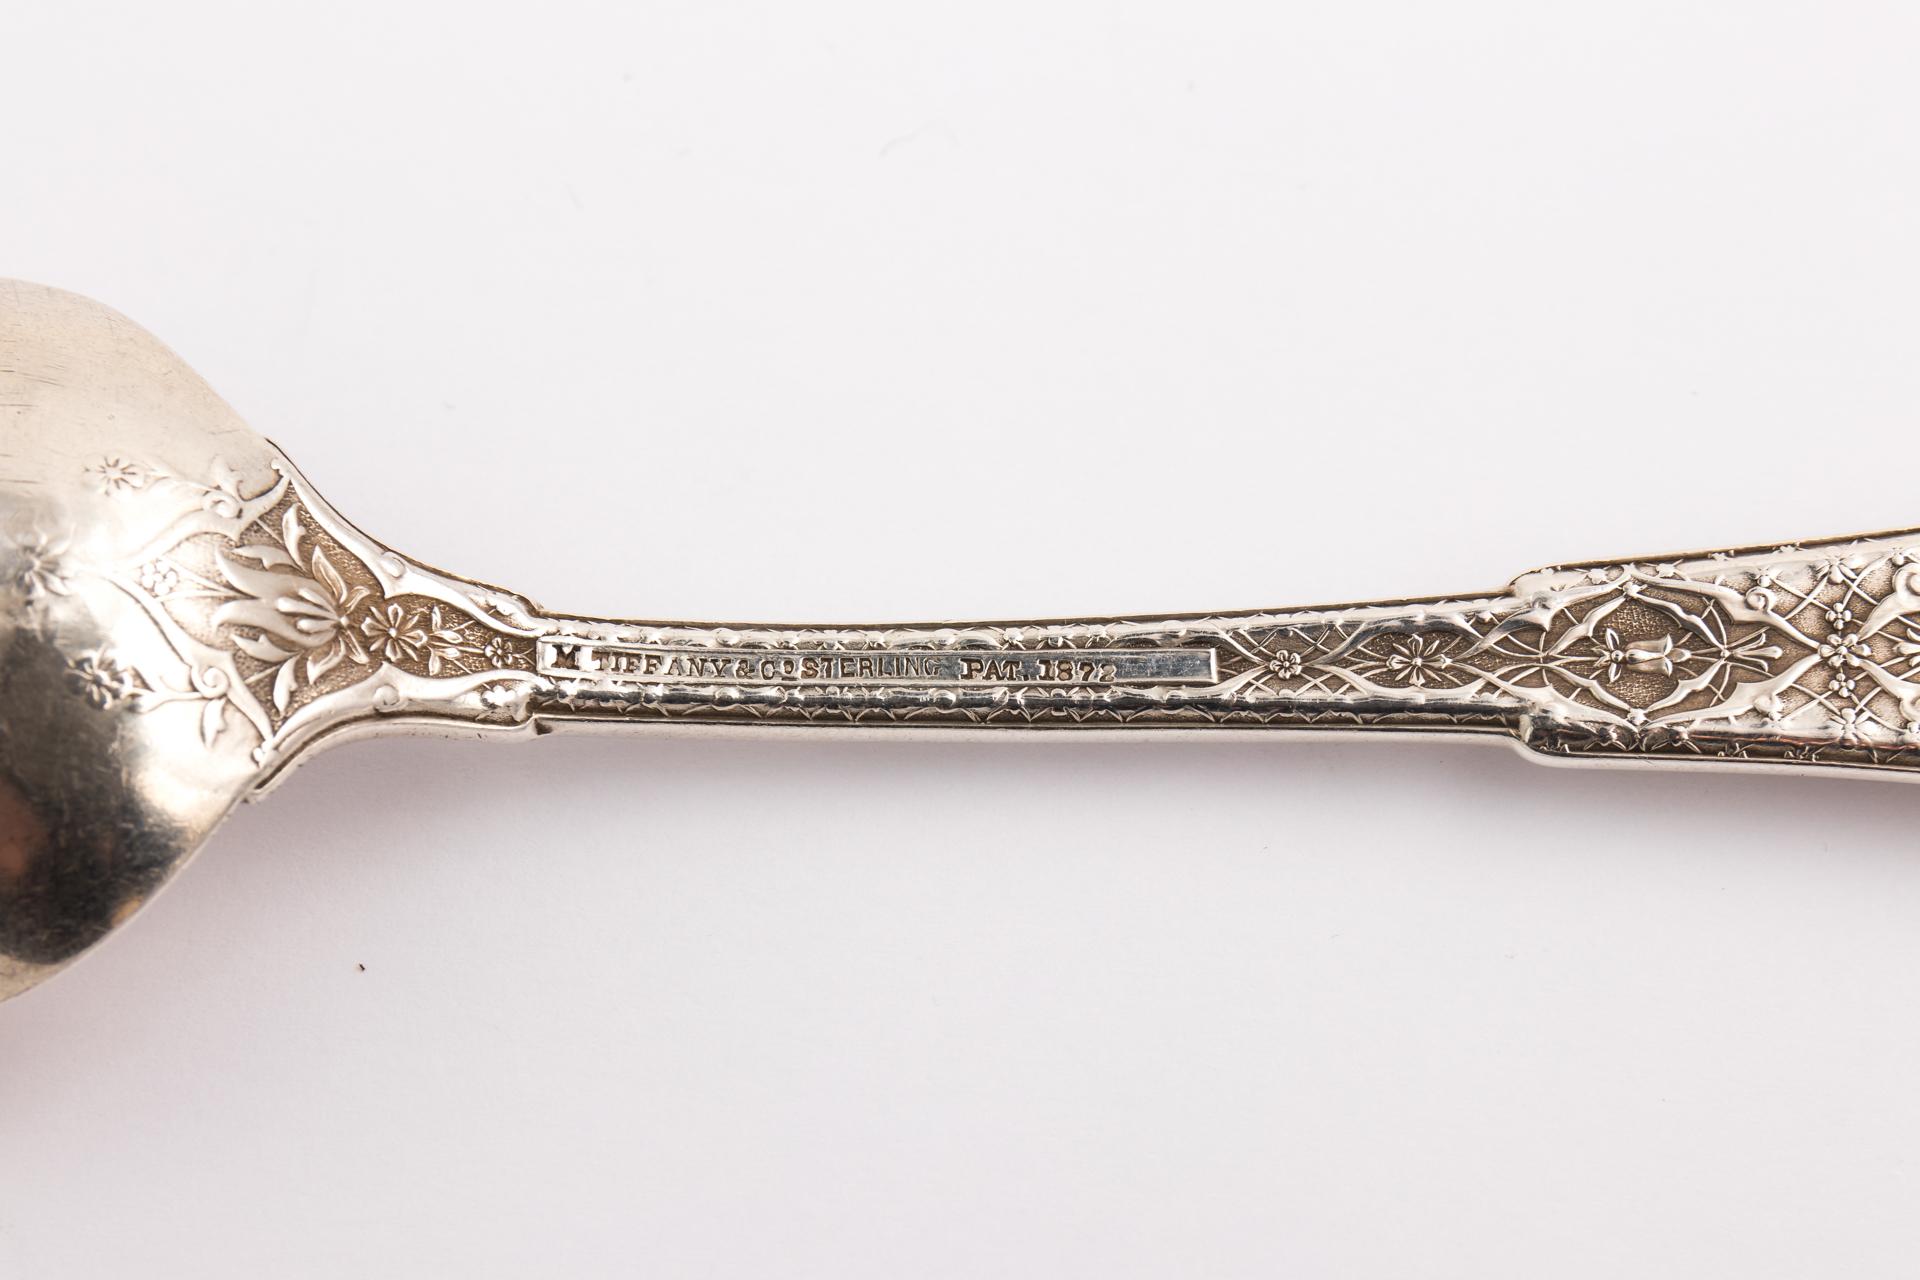 Set of 5 sterling silver spoon made by Tiffany & Co. in the Persian pattern. The spoons have ornate woven pattern that was inspired by Persian rugs. Each spoon is 8 3/8 inches long and about 50 grams each. The total weight of the 5 spoons are 251.7